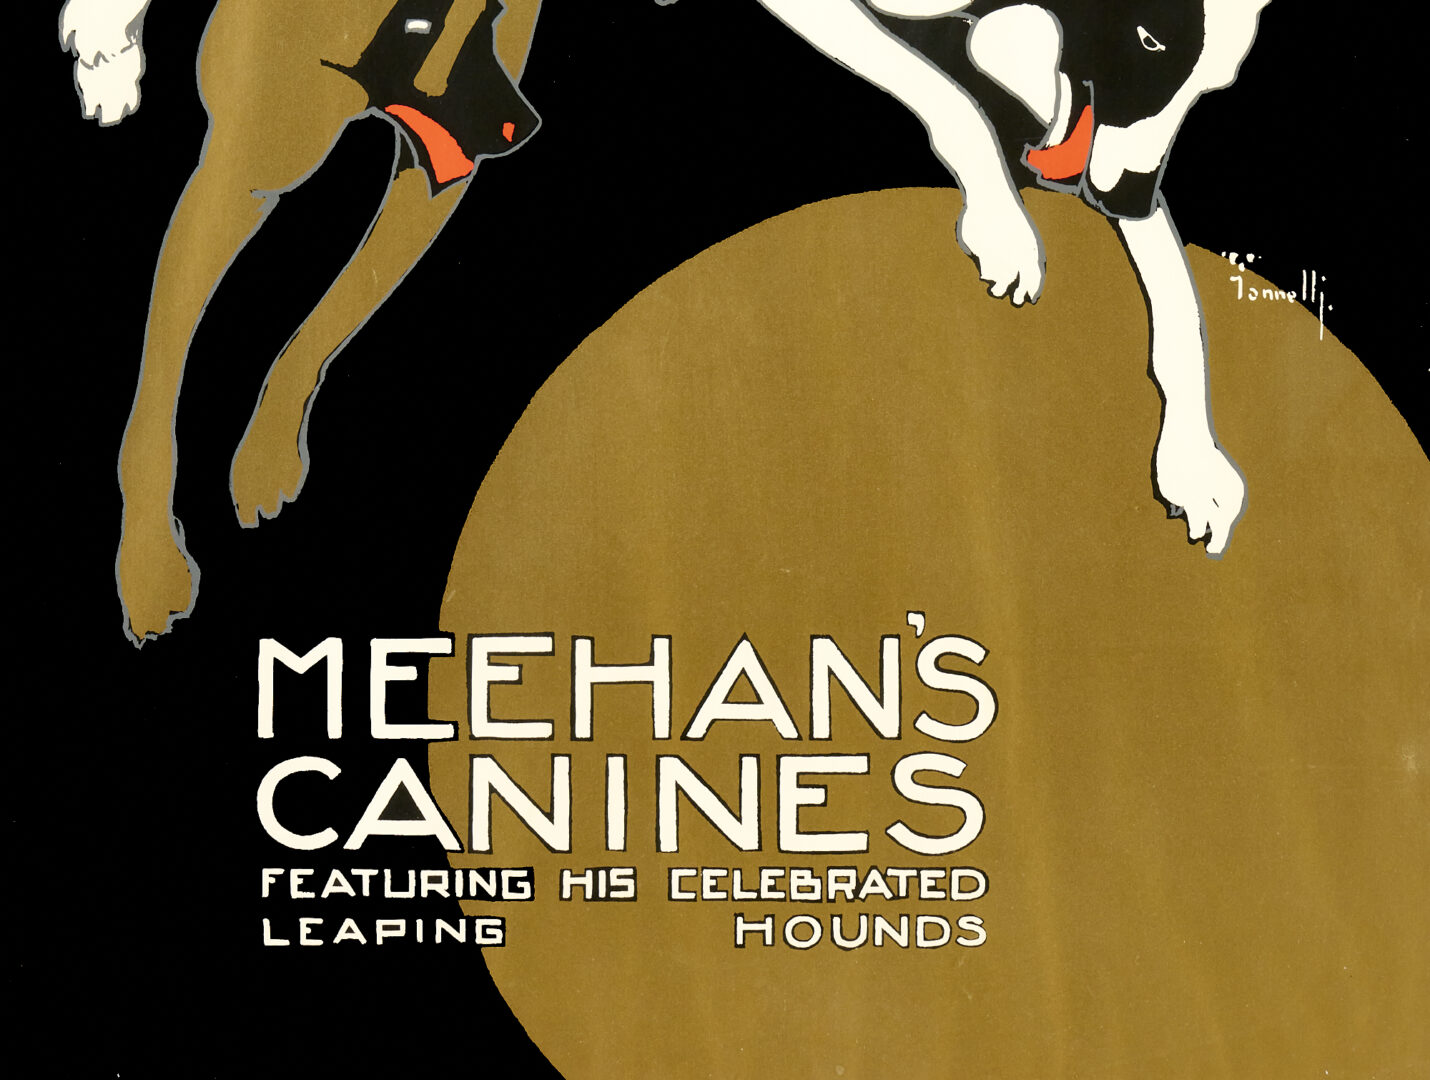 Lot 815: 2 Alfonso Iannelli Art Deco Theatre Posters, Alice Lloyd & Meehan's Canines